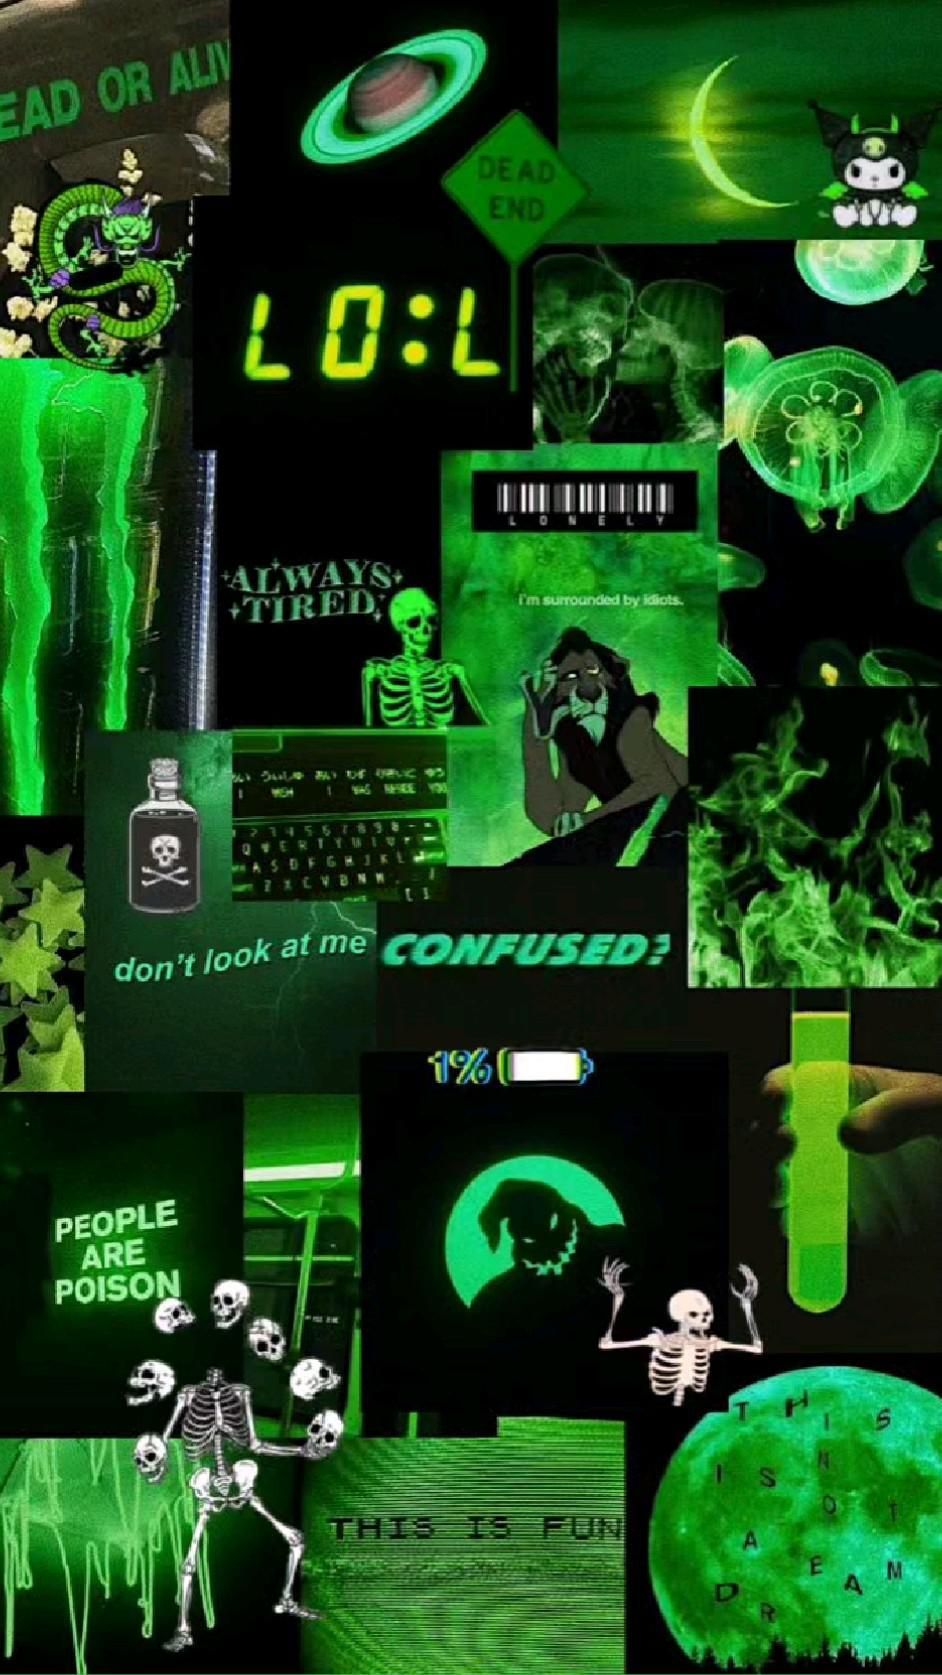 A collage of green glowing images with text - Neon green, lime green